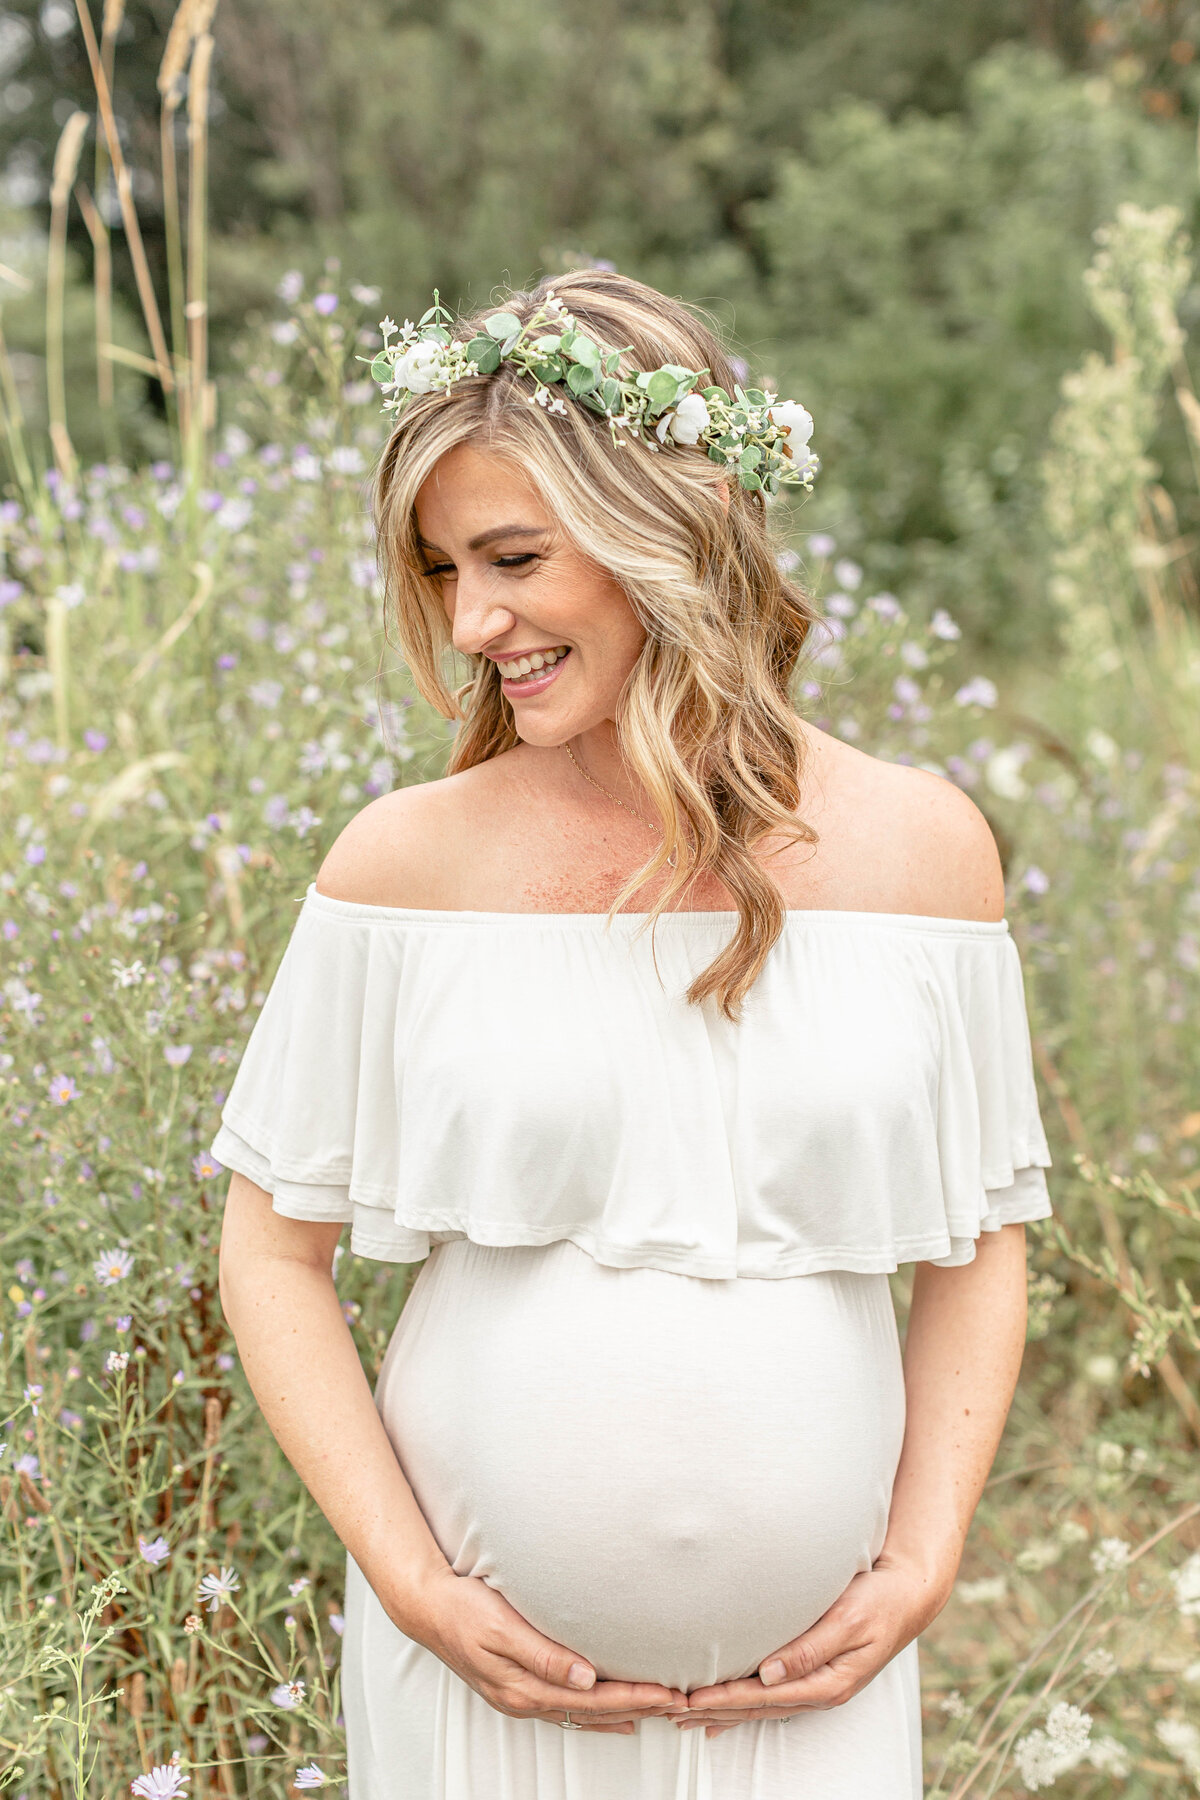 Pregnant woman in white off-the-shoulder dress holding pregnant belly and standing in a big tall grassy field with wildflowers. Portland Maternity Photographer